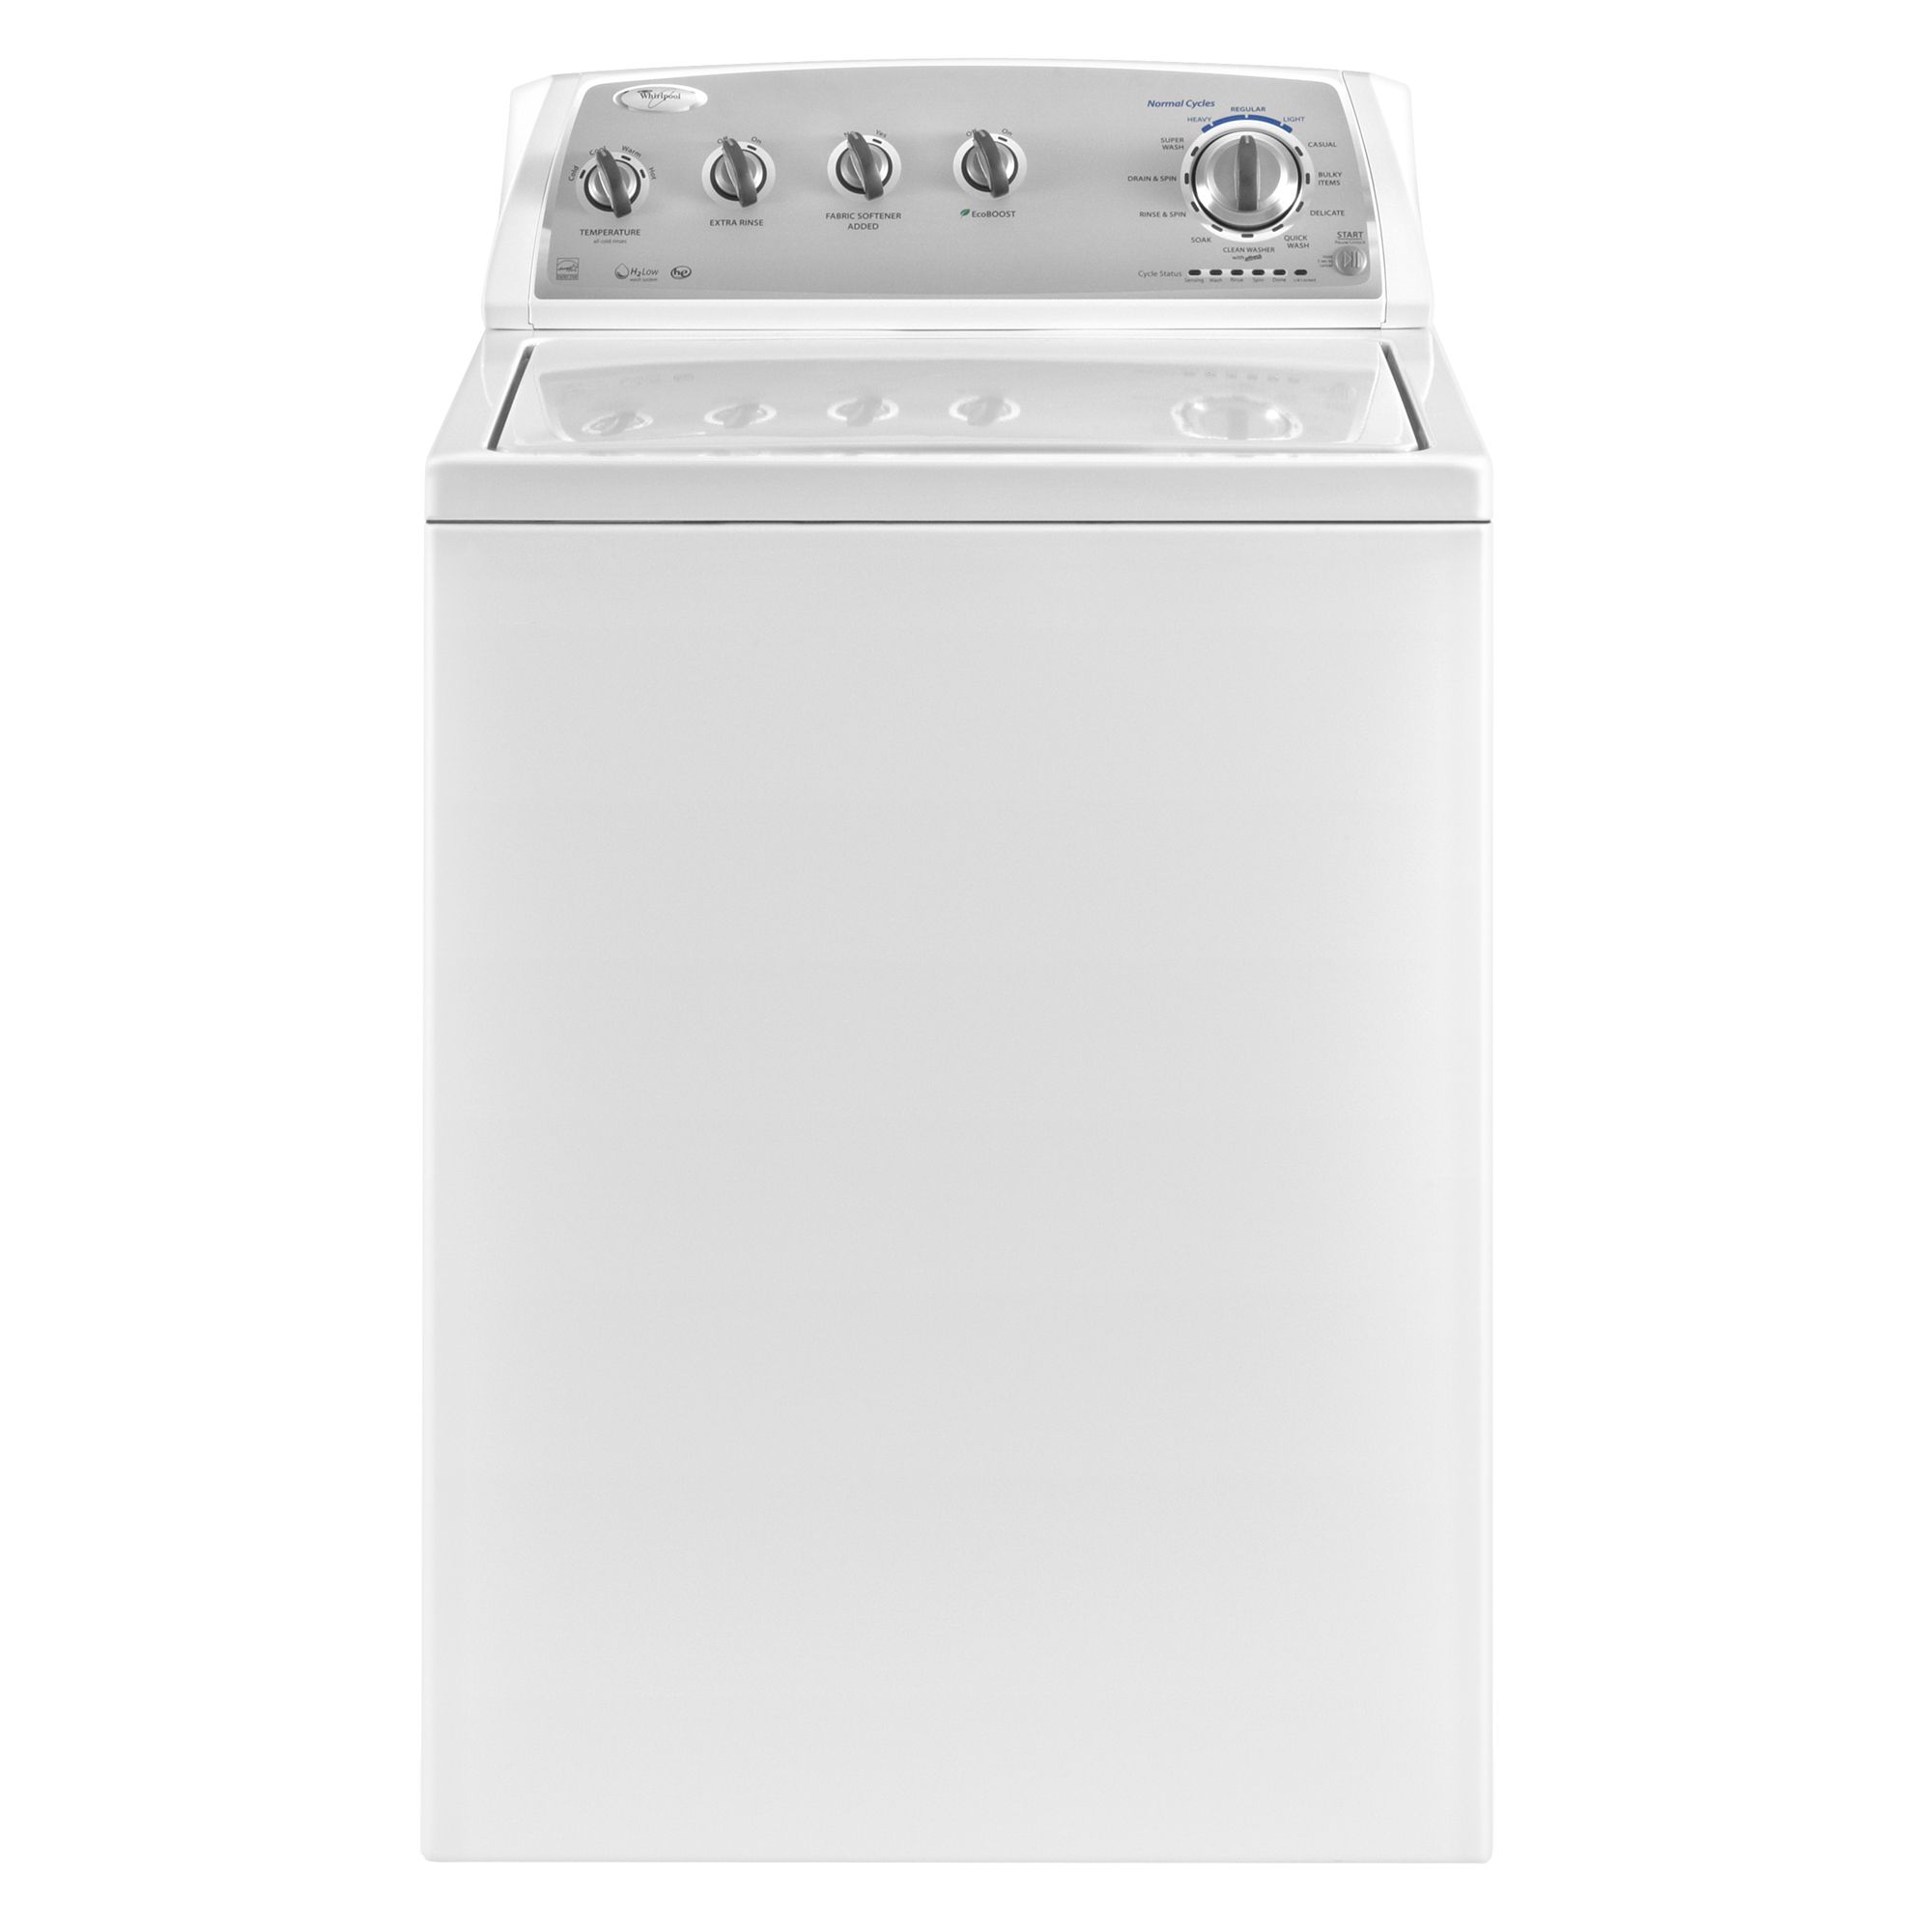 3.6 cu. ft. High-Efficiency Top-Load Washer